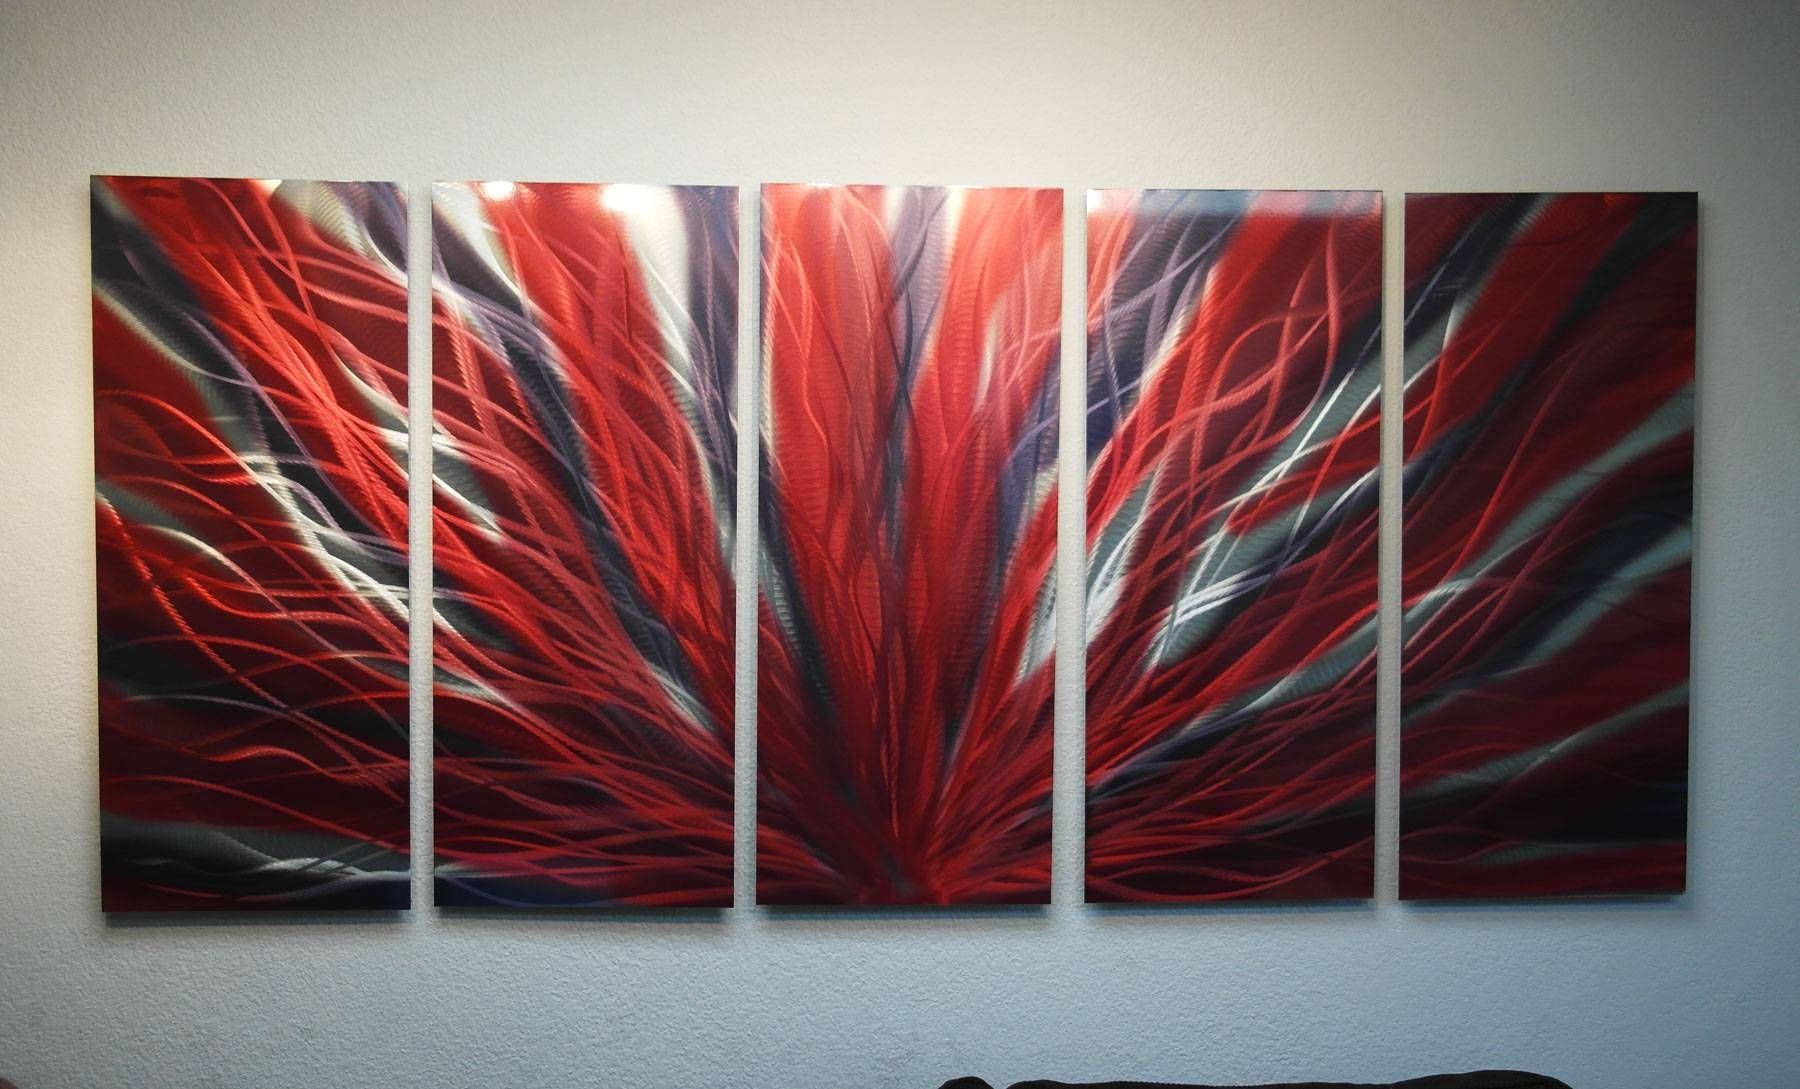 Large Radiance Red And Black  Metal Wall Art Abstract Sculpture Intended For Most Recent Red And Black Metal Wall Art (View 5 of 20)